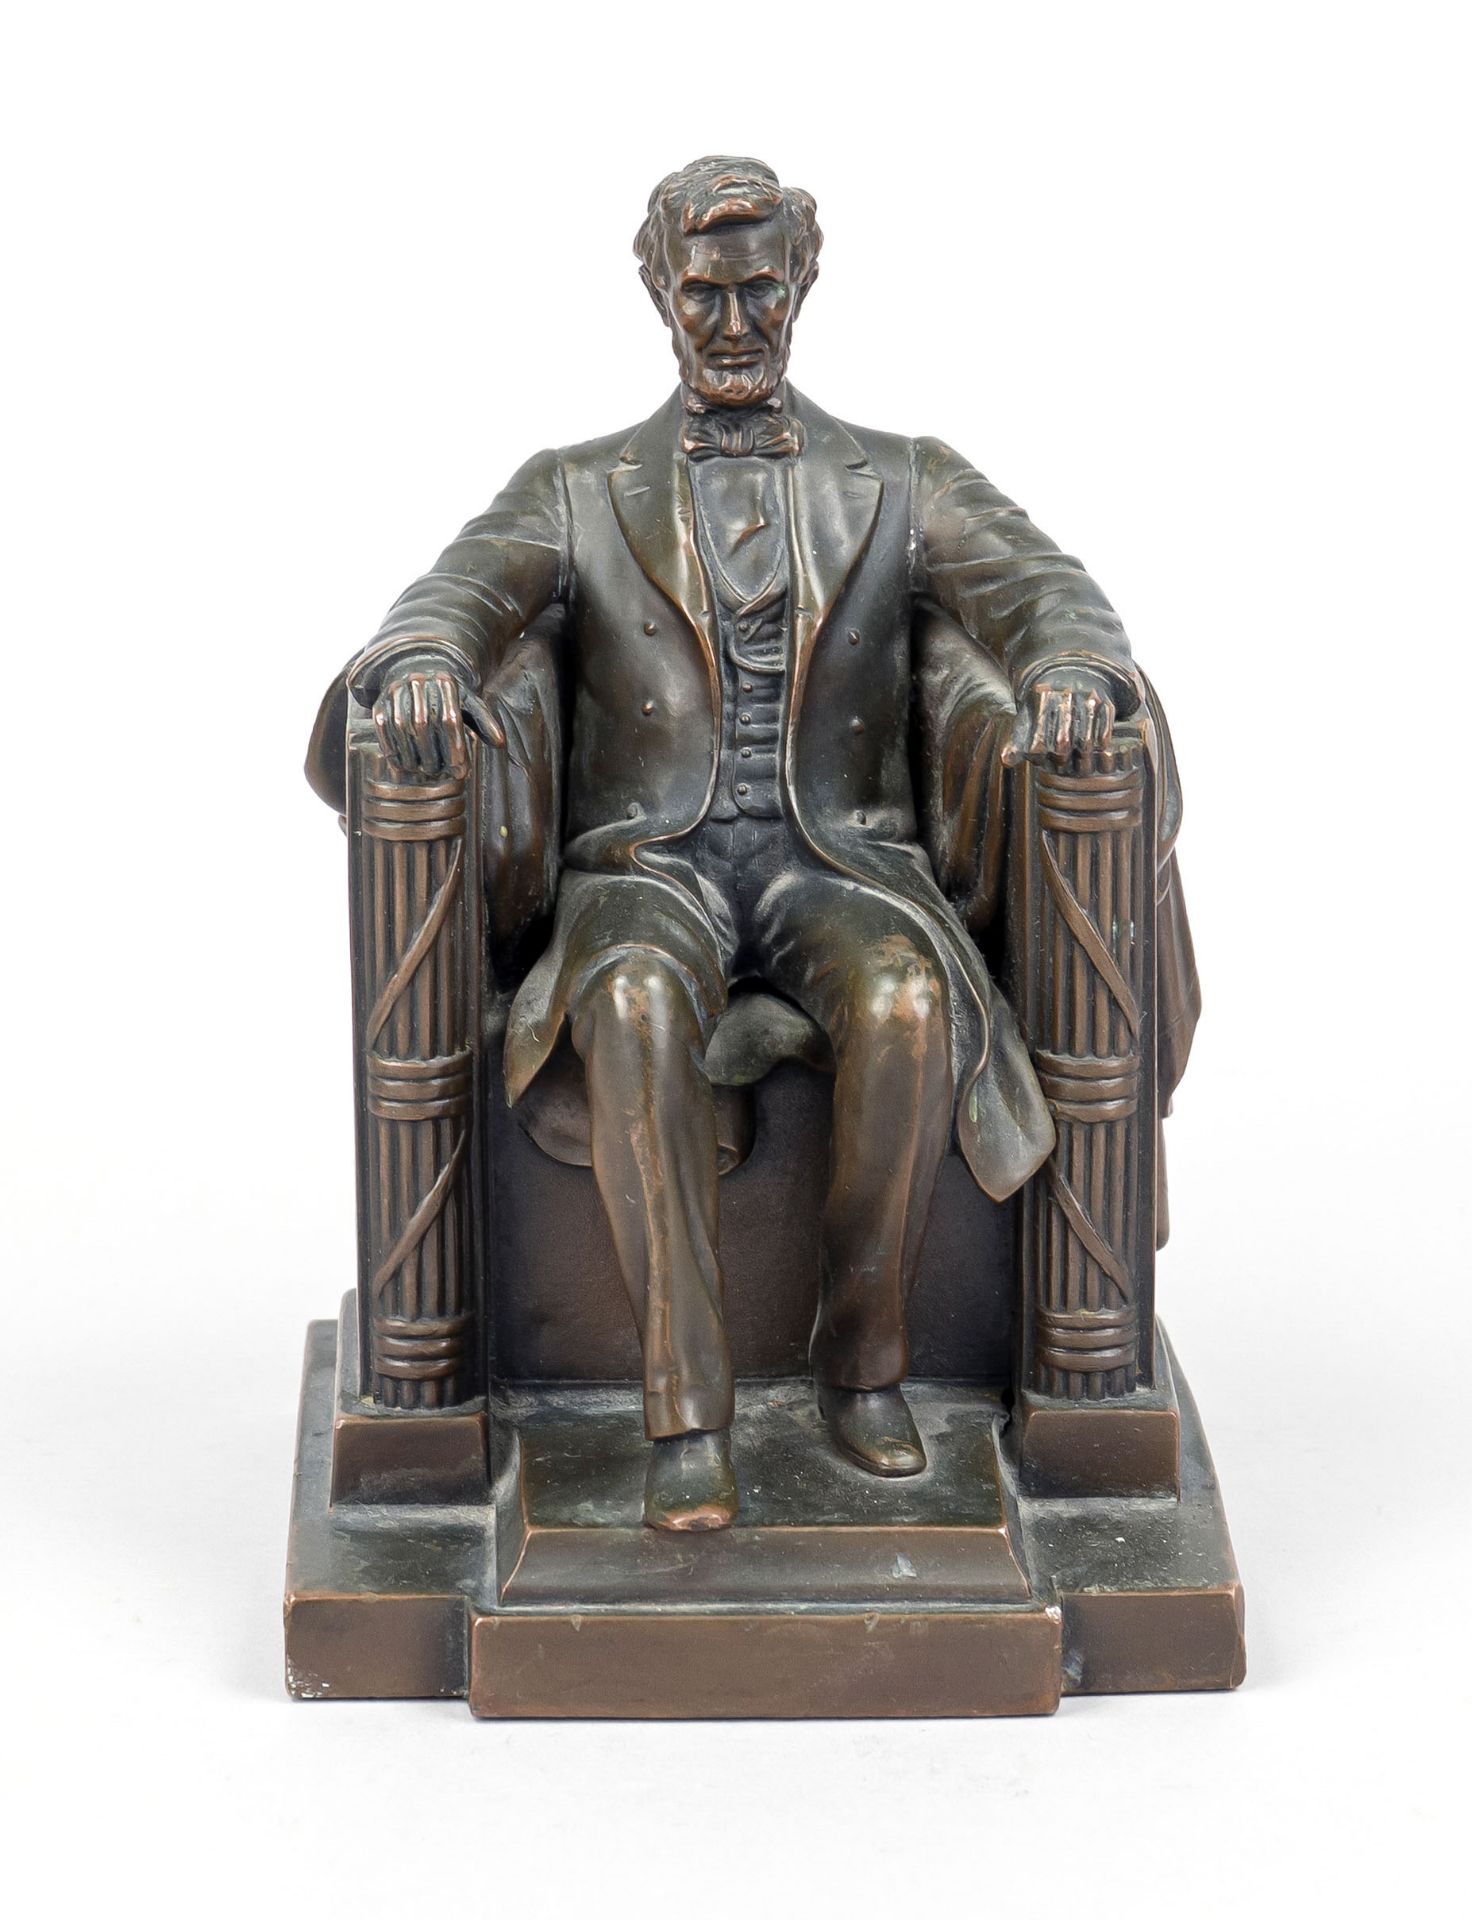 Unknown sculptor, c. 1900, enthroned Abraham Lincoln, patinated cast metal, inscribed ''J.B. 2440 DC